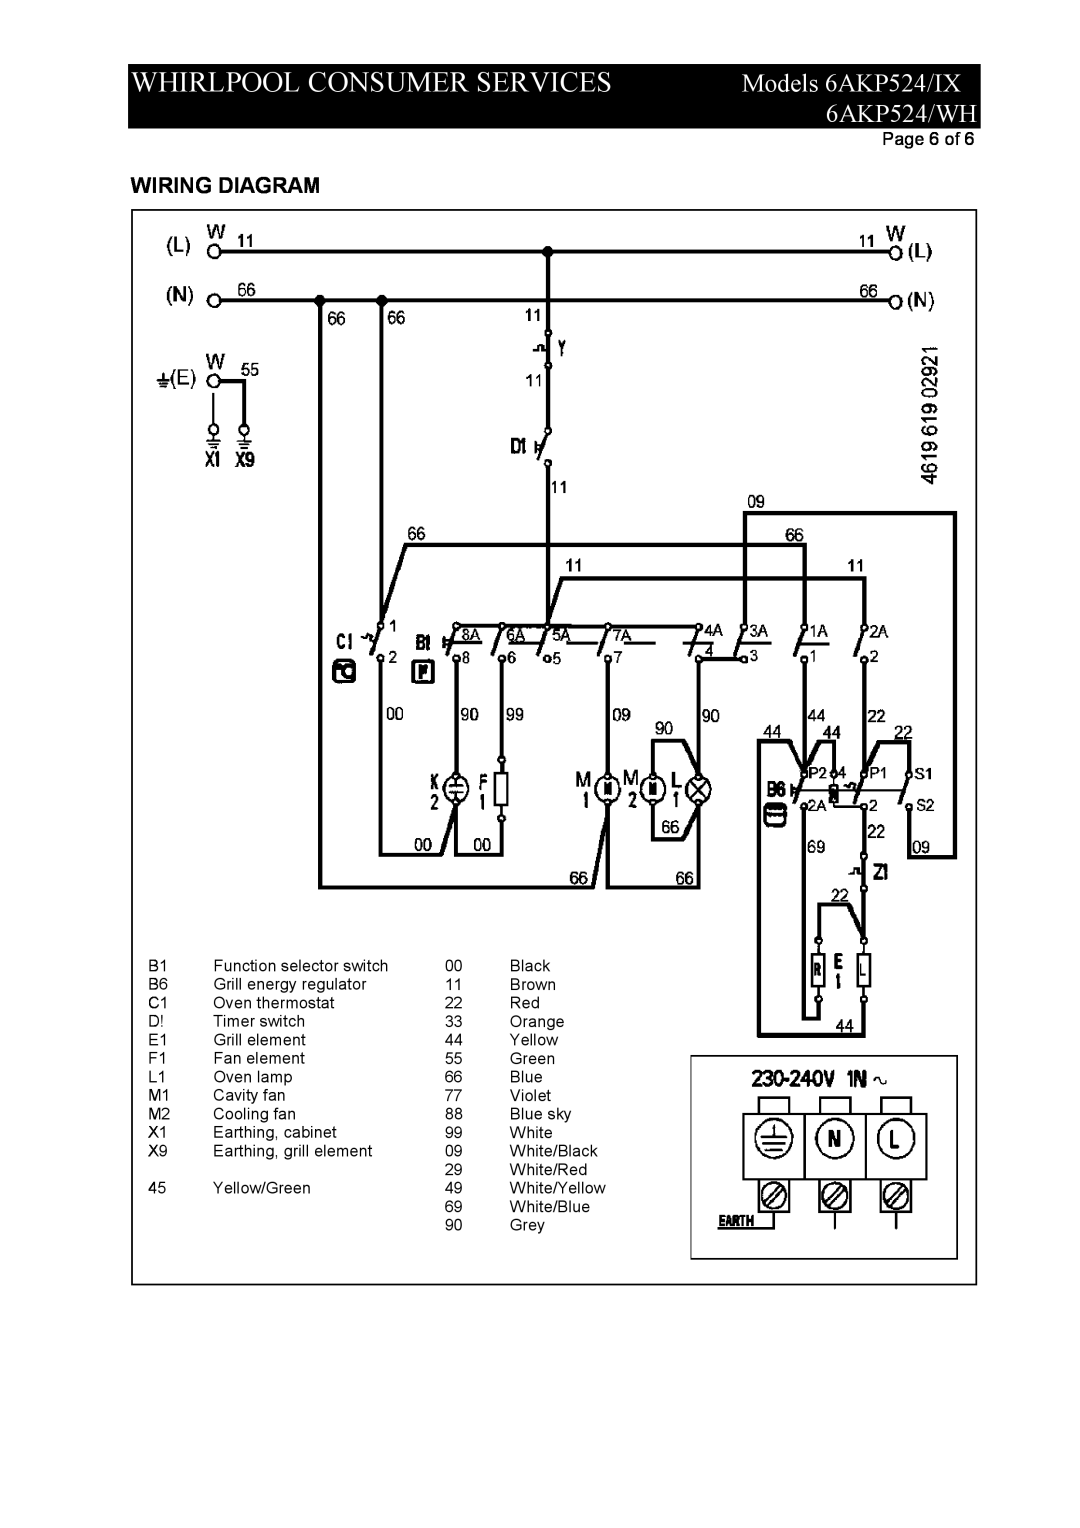 Whirlpool 6AKP524/WH service manual Whirlpool Consumer Services, Models 6AKP524/IX, Wiring Diagram, Page 6 of 